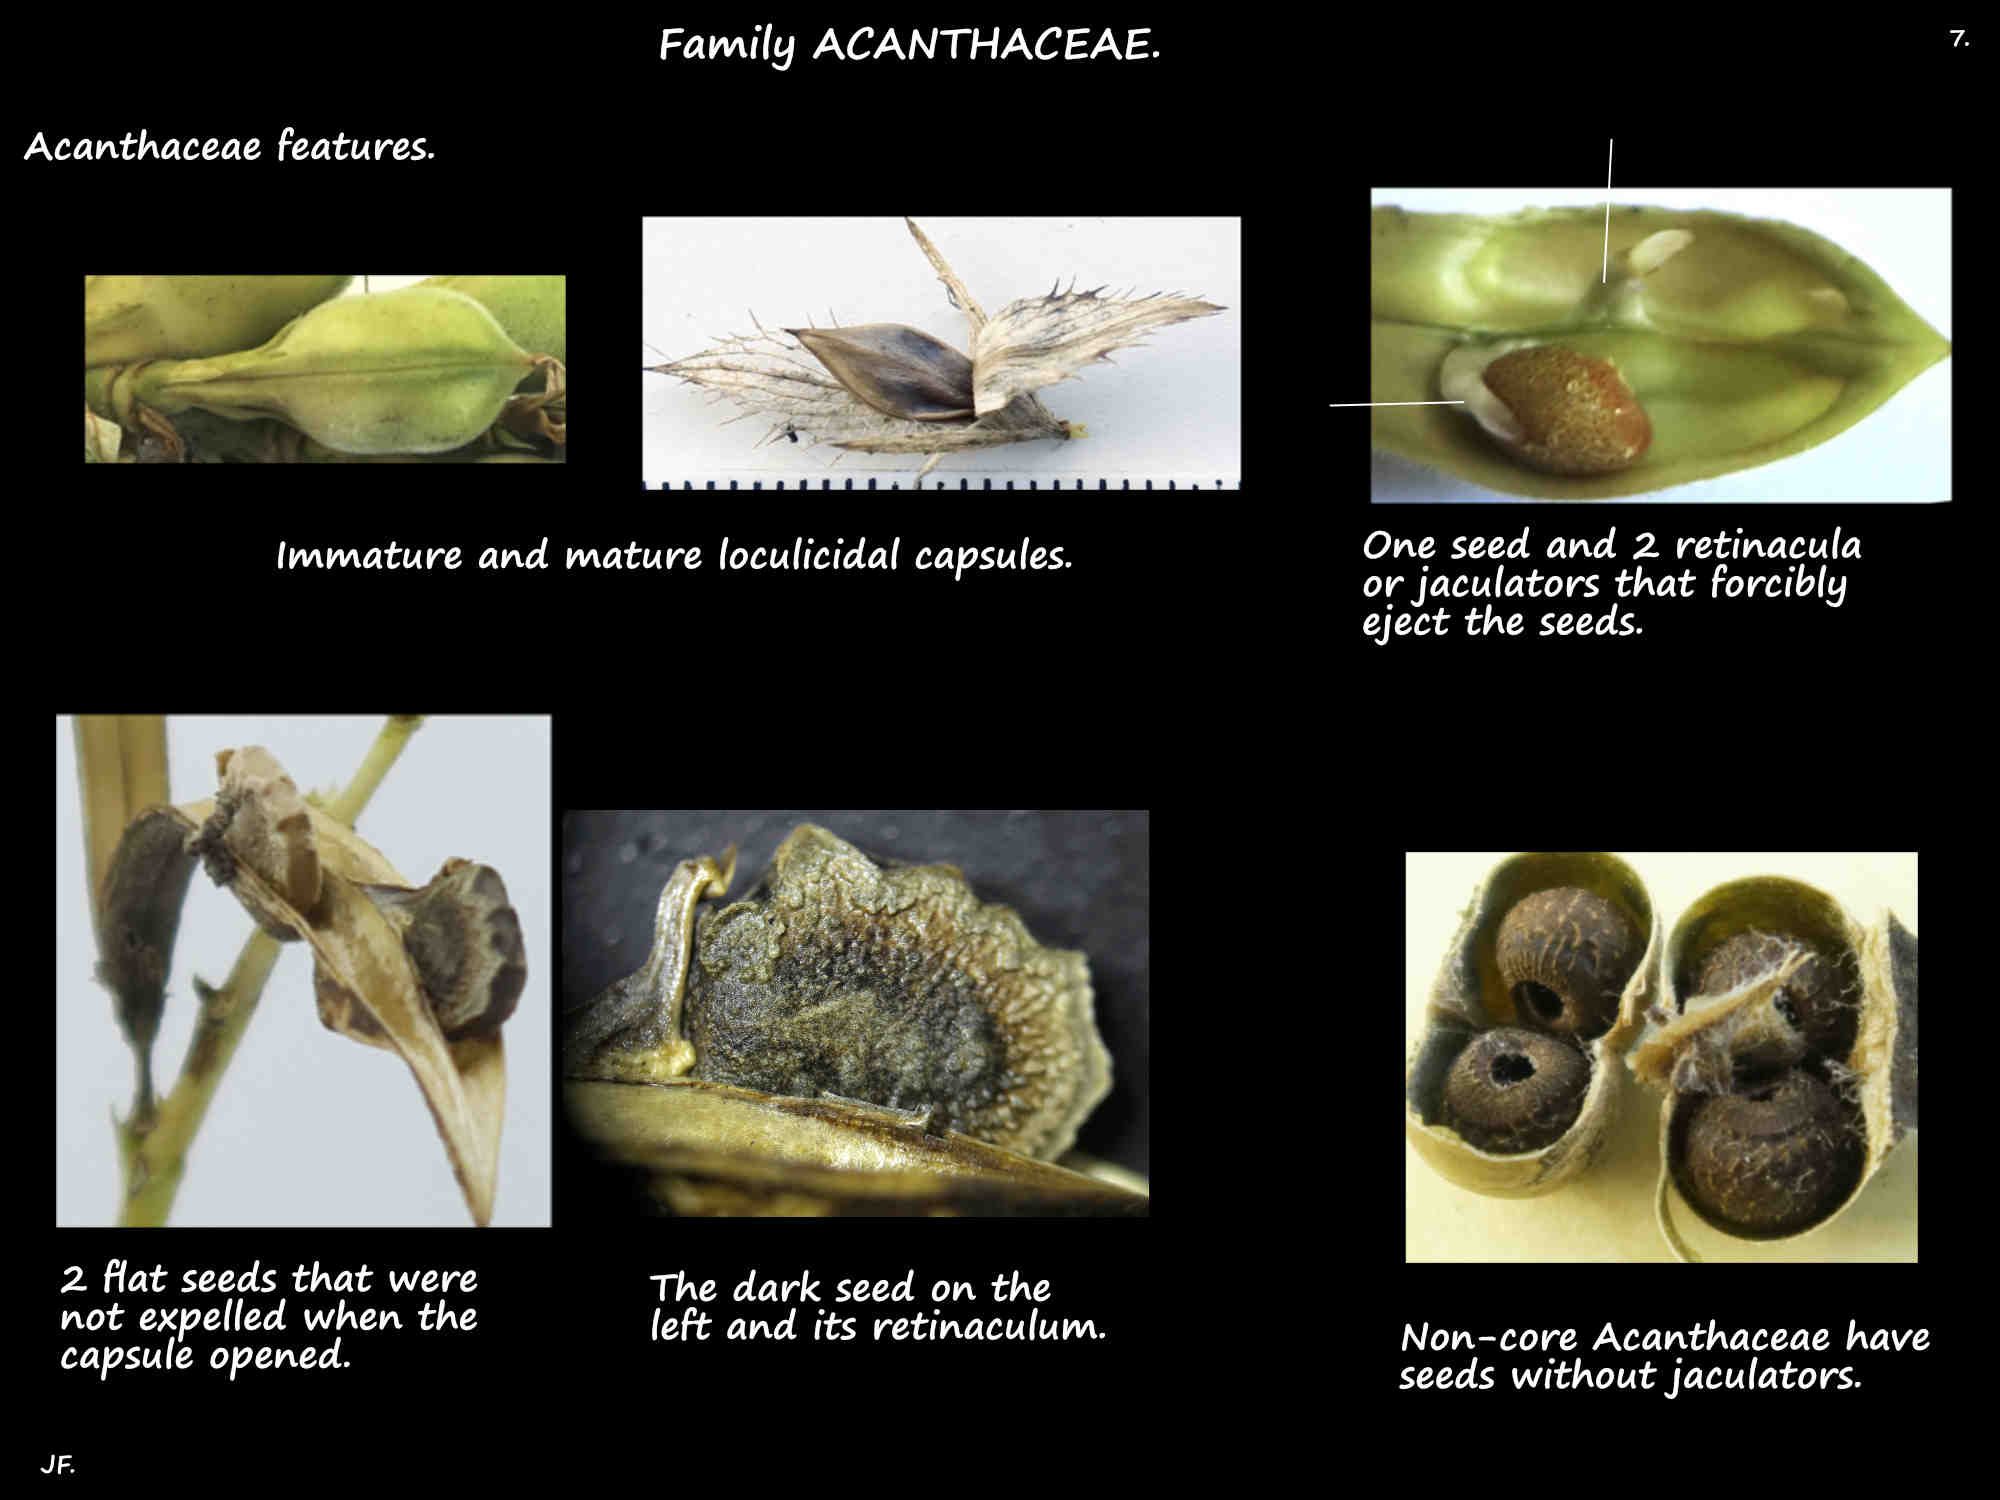 7 The retinaculum & seeds of Acanthaceae fruit